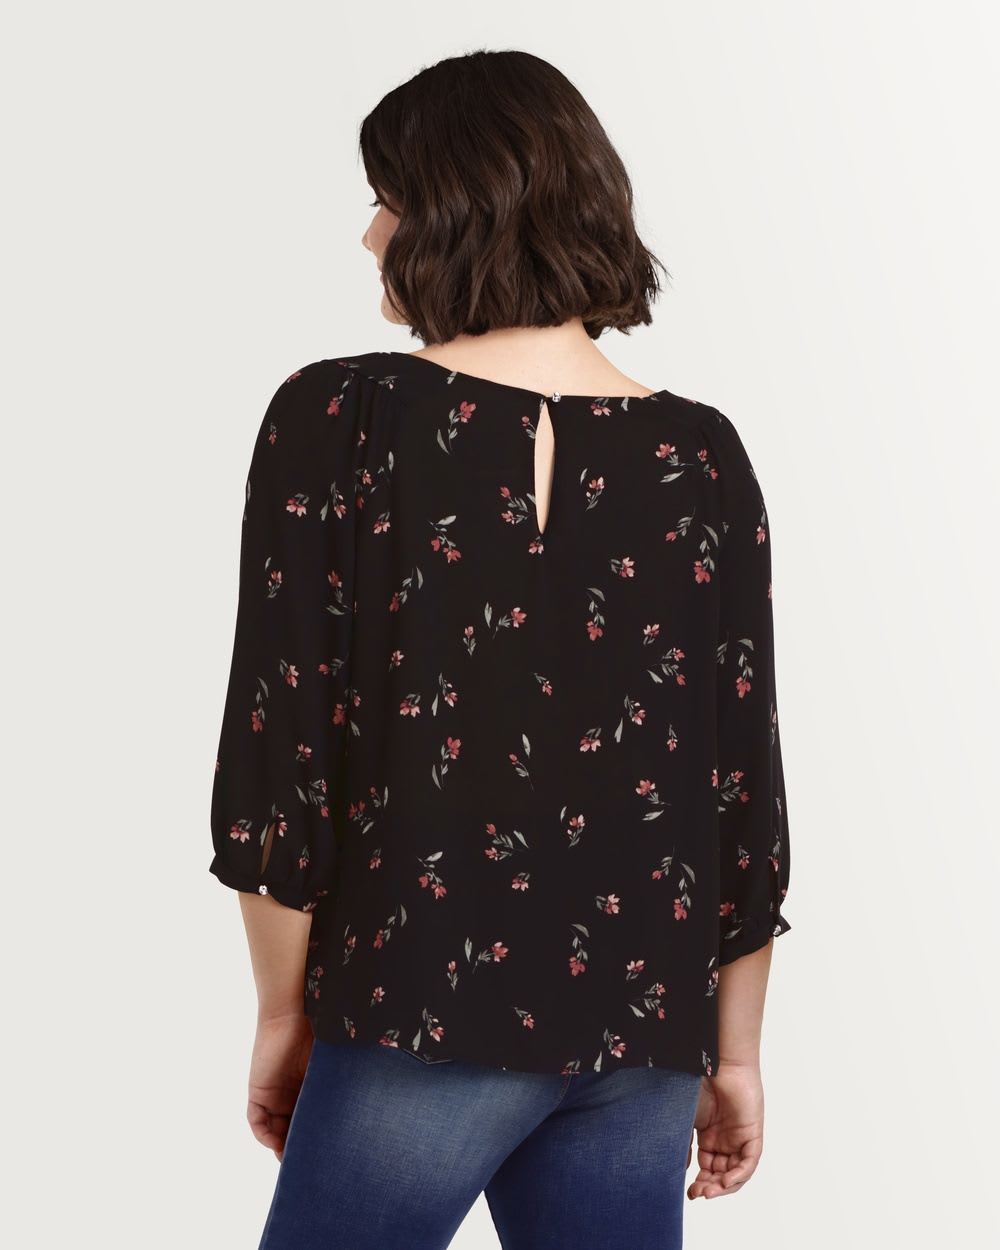 Printed Boat Neck Crepe Blouse